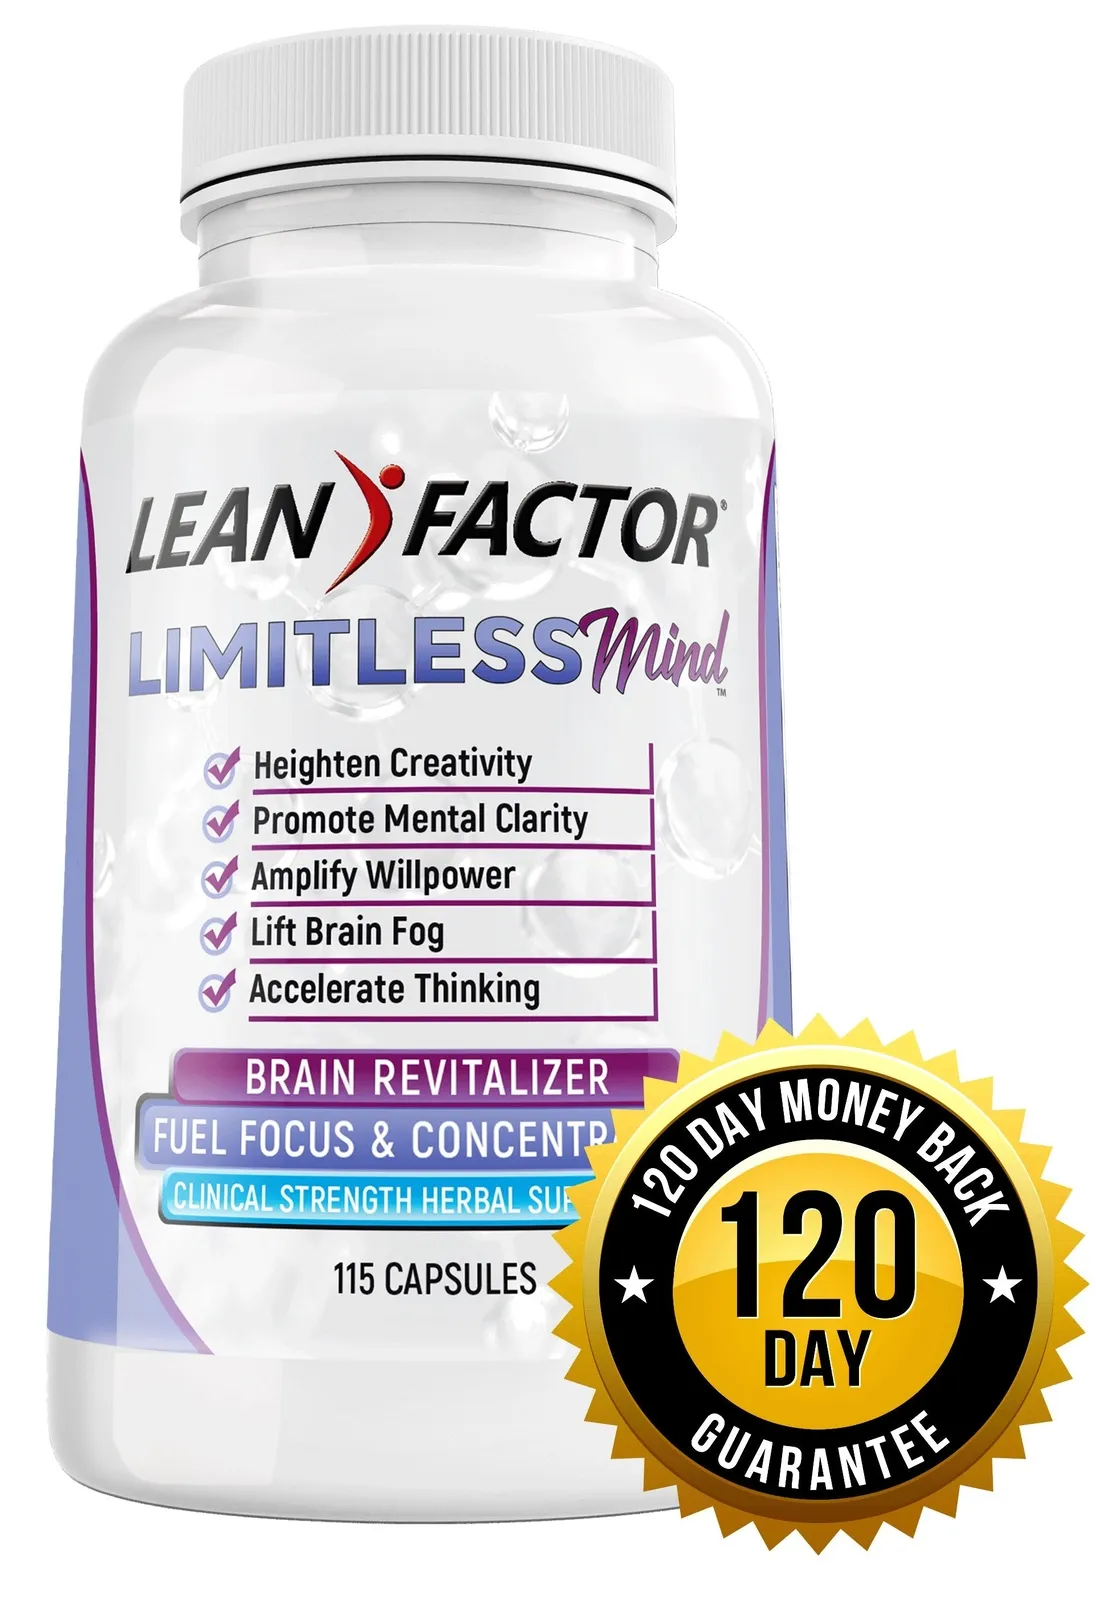 Limitless Mind - Ultimate Nootropic Brain Booster